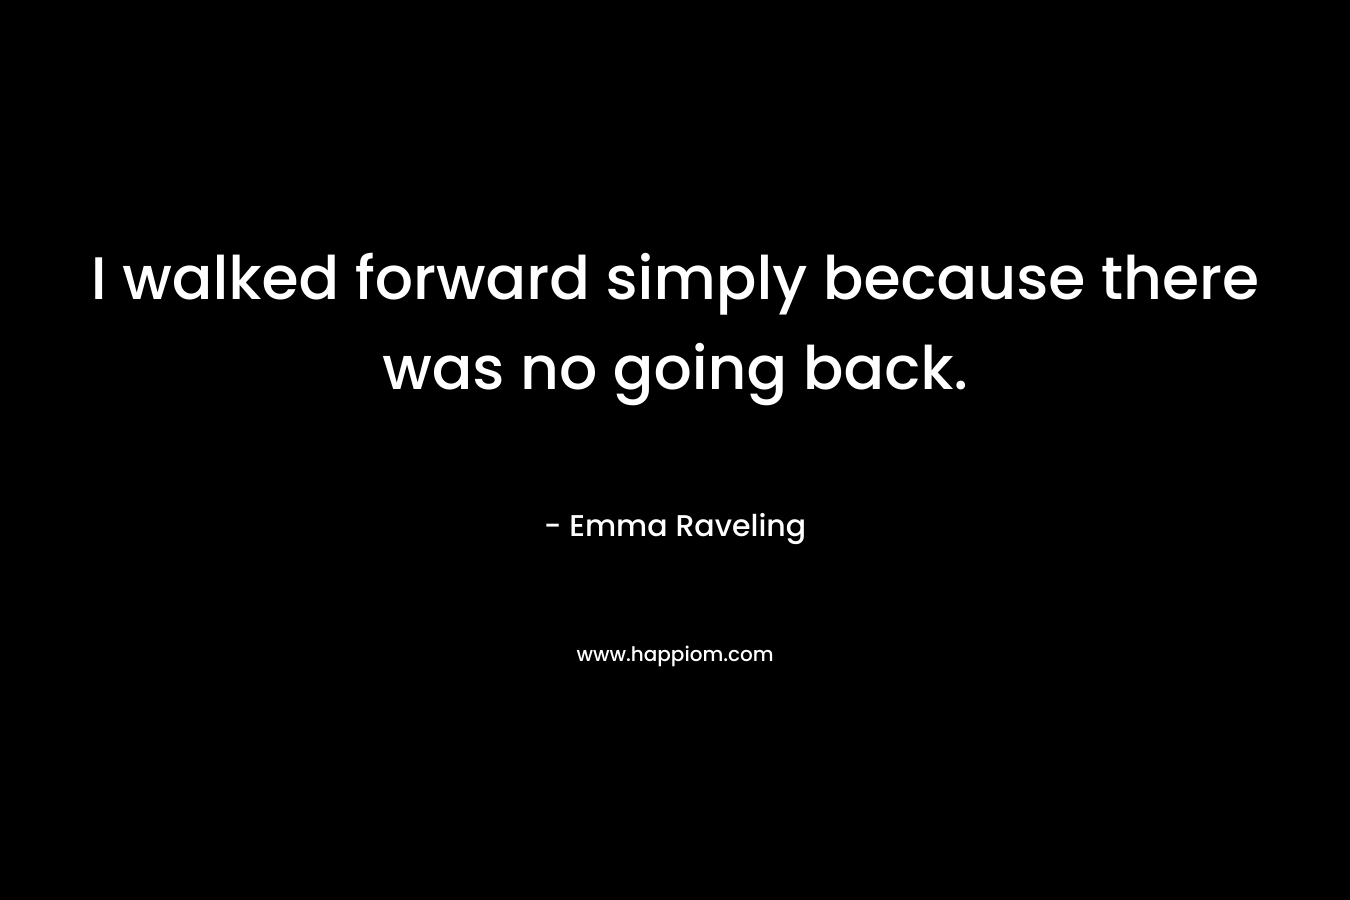 I walked forward simply because there was no going back.